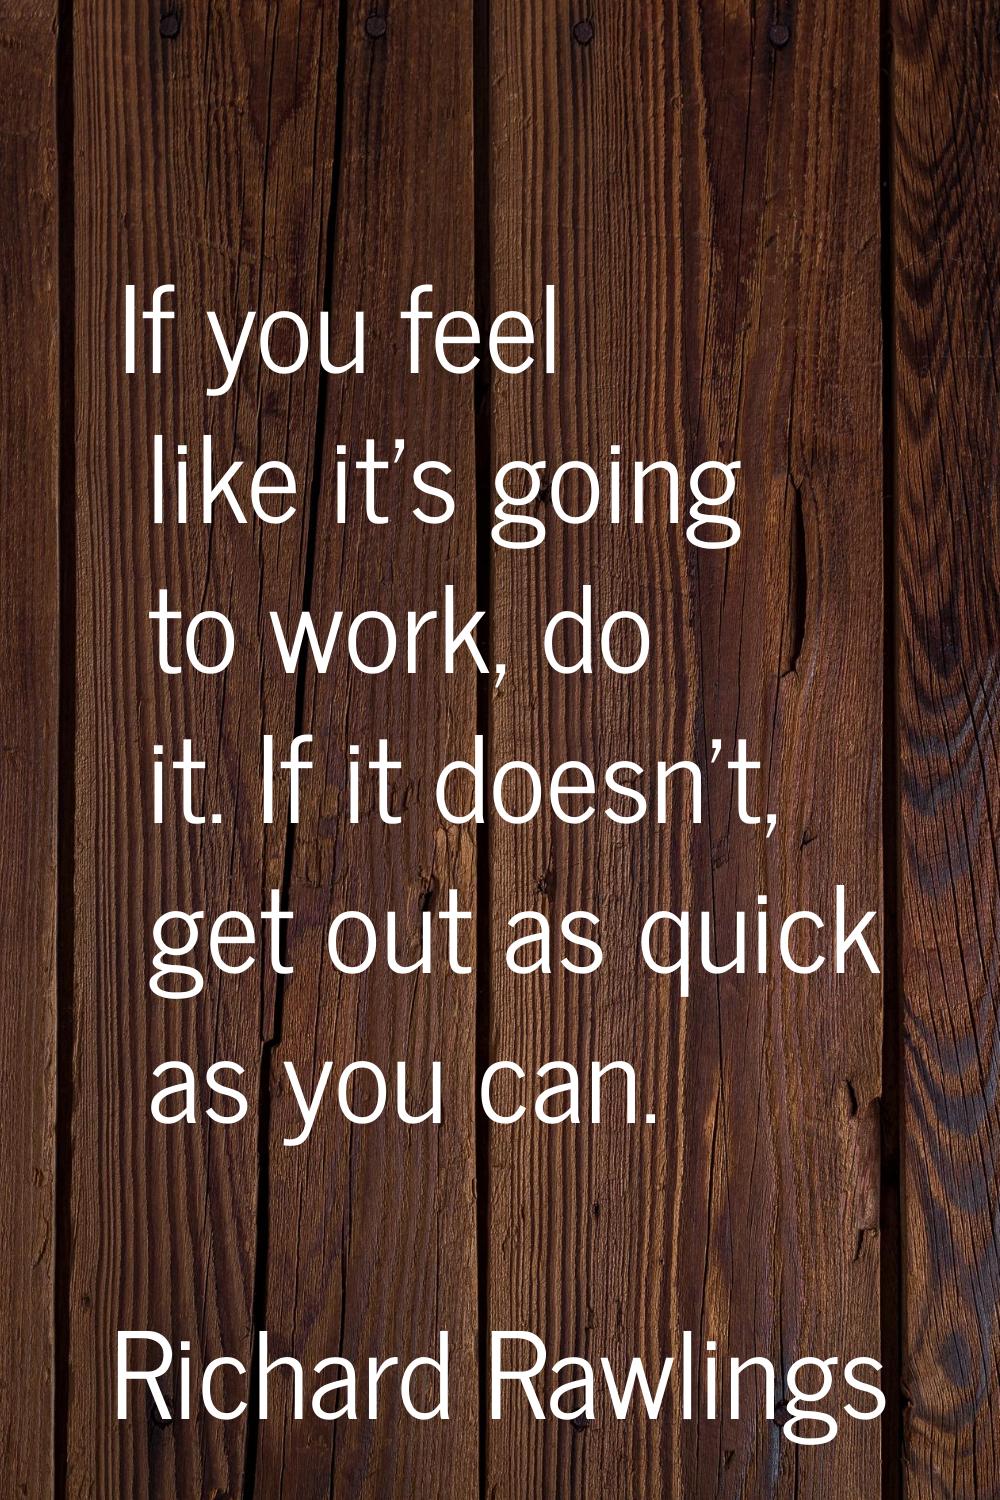 If you feel like it's going to work, do it. If it doesn't, get out as quick as you can.